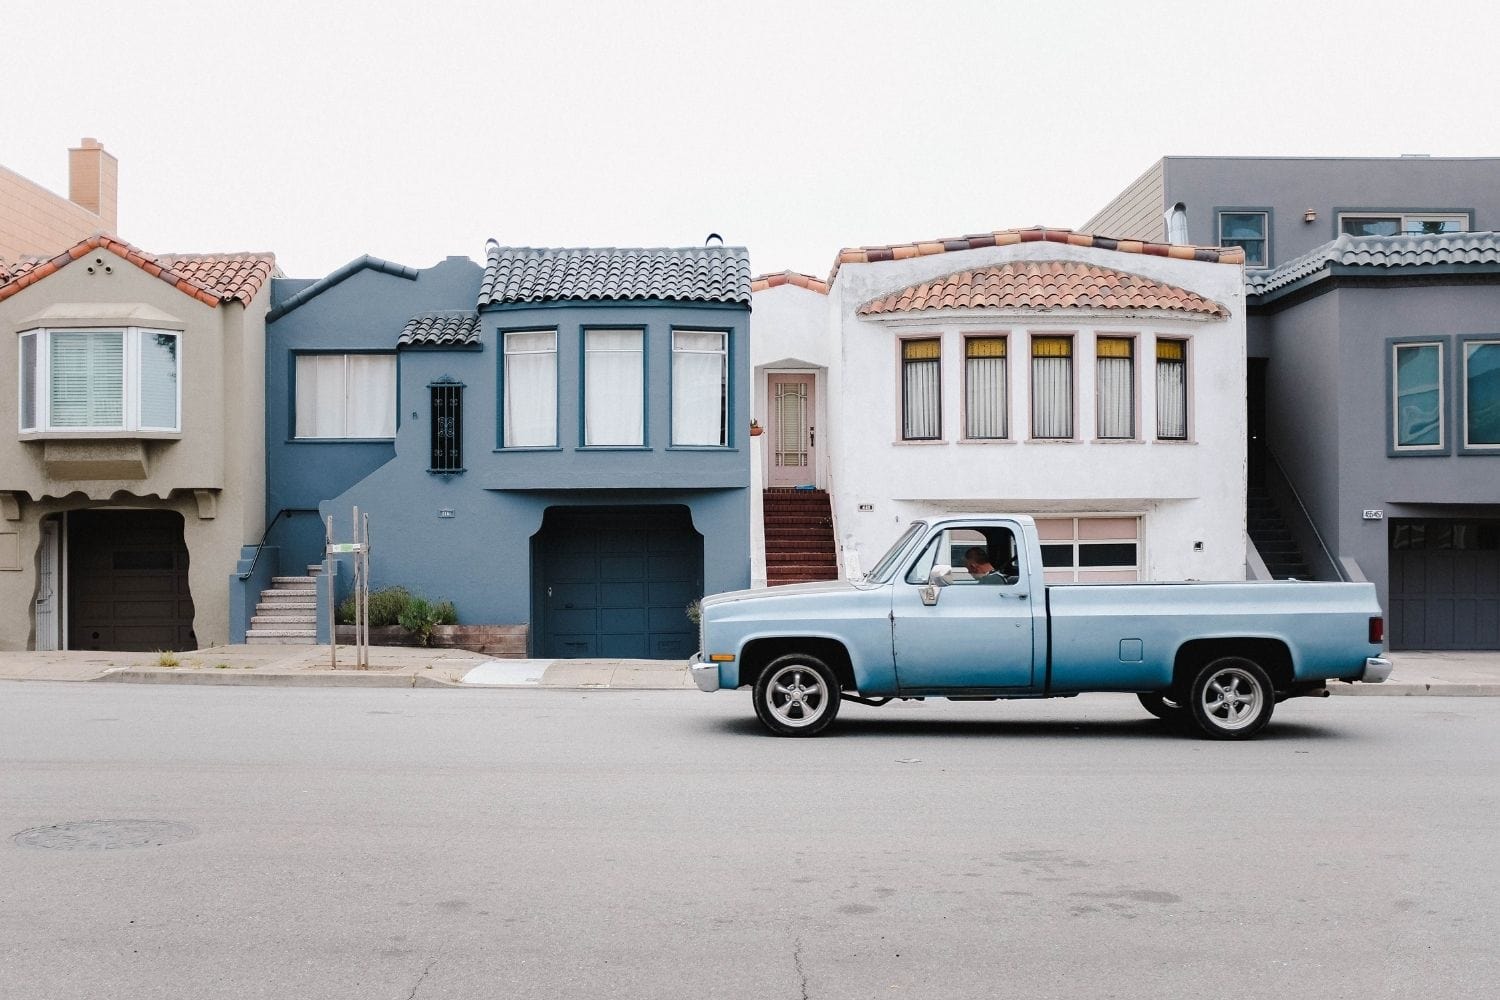 Old blue truck parked in front of san francisco houses